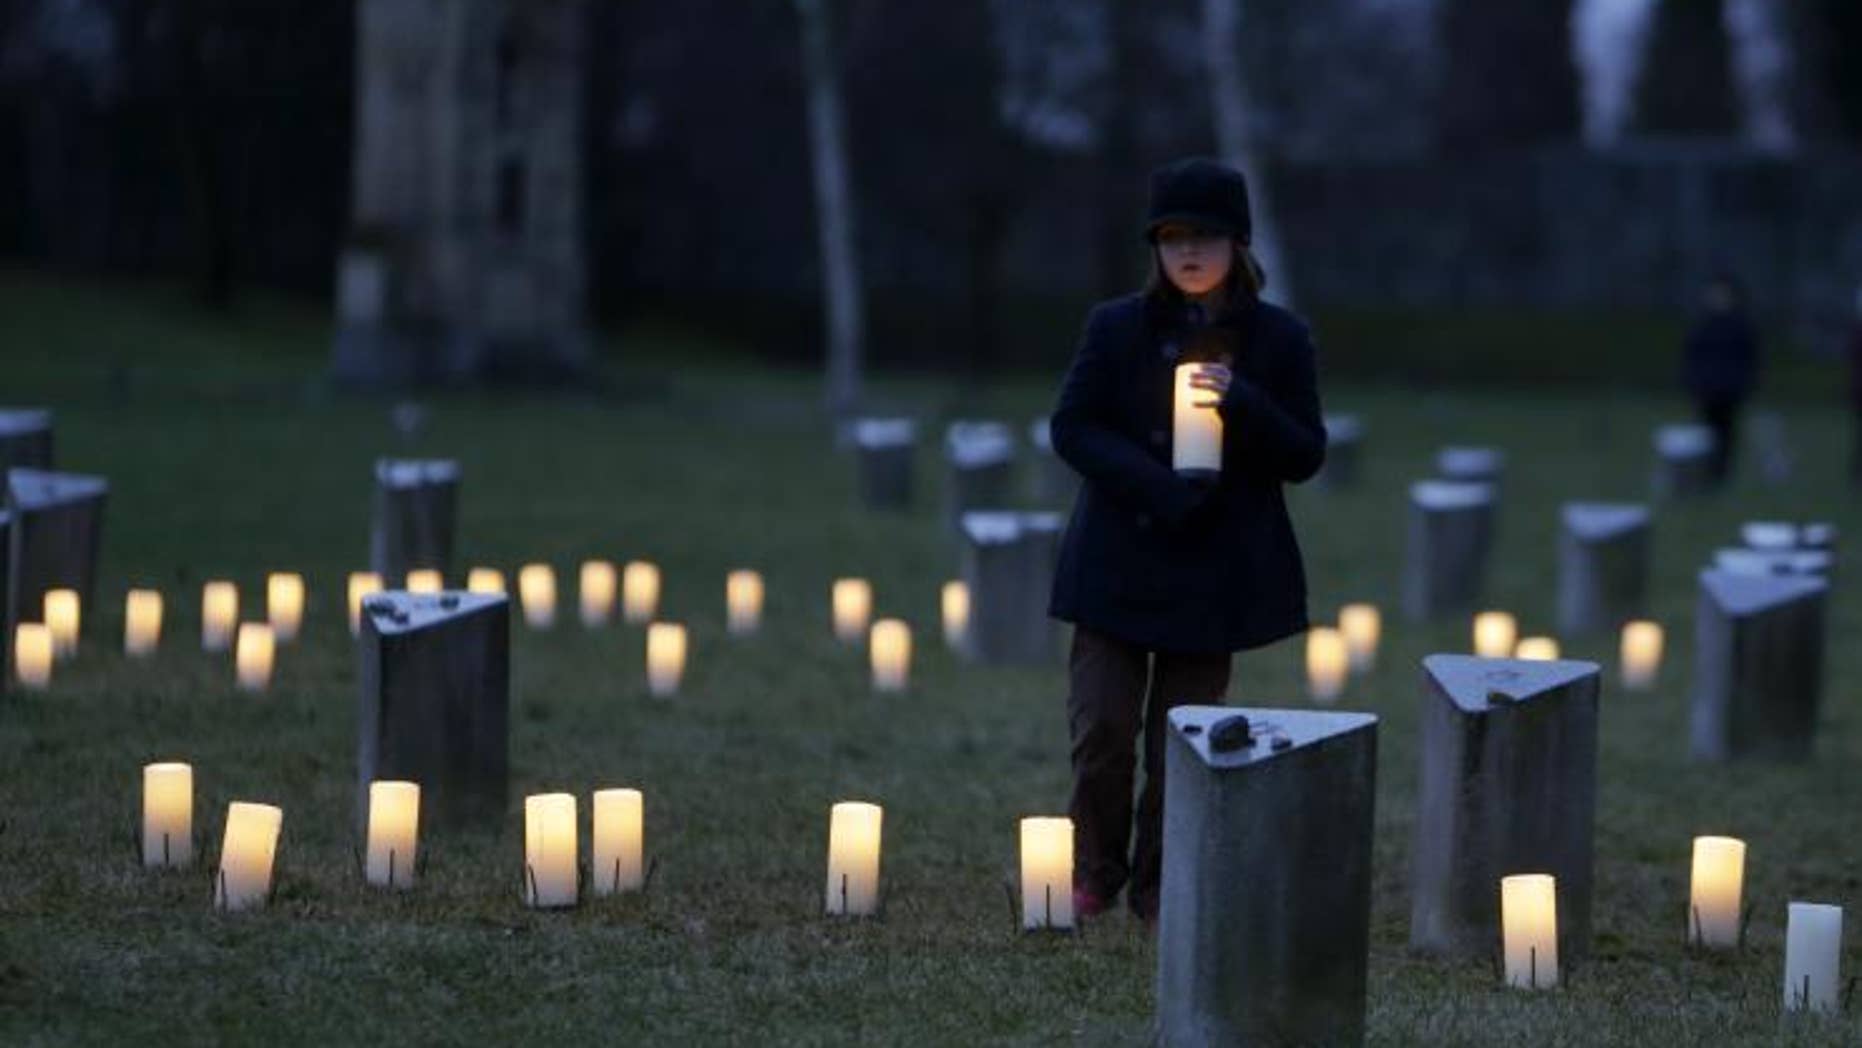 Holocaust Remembrance Day 70 years after World War II, Jewhatred is